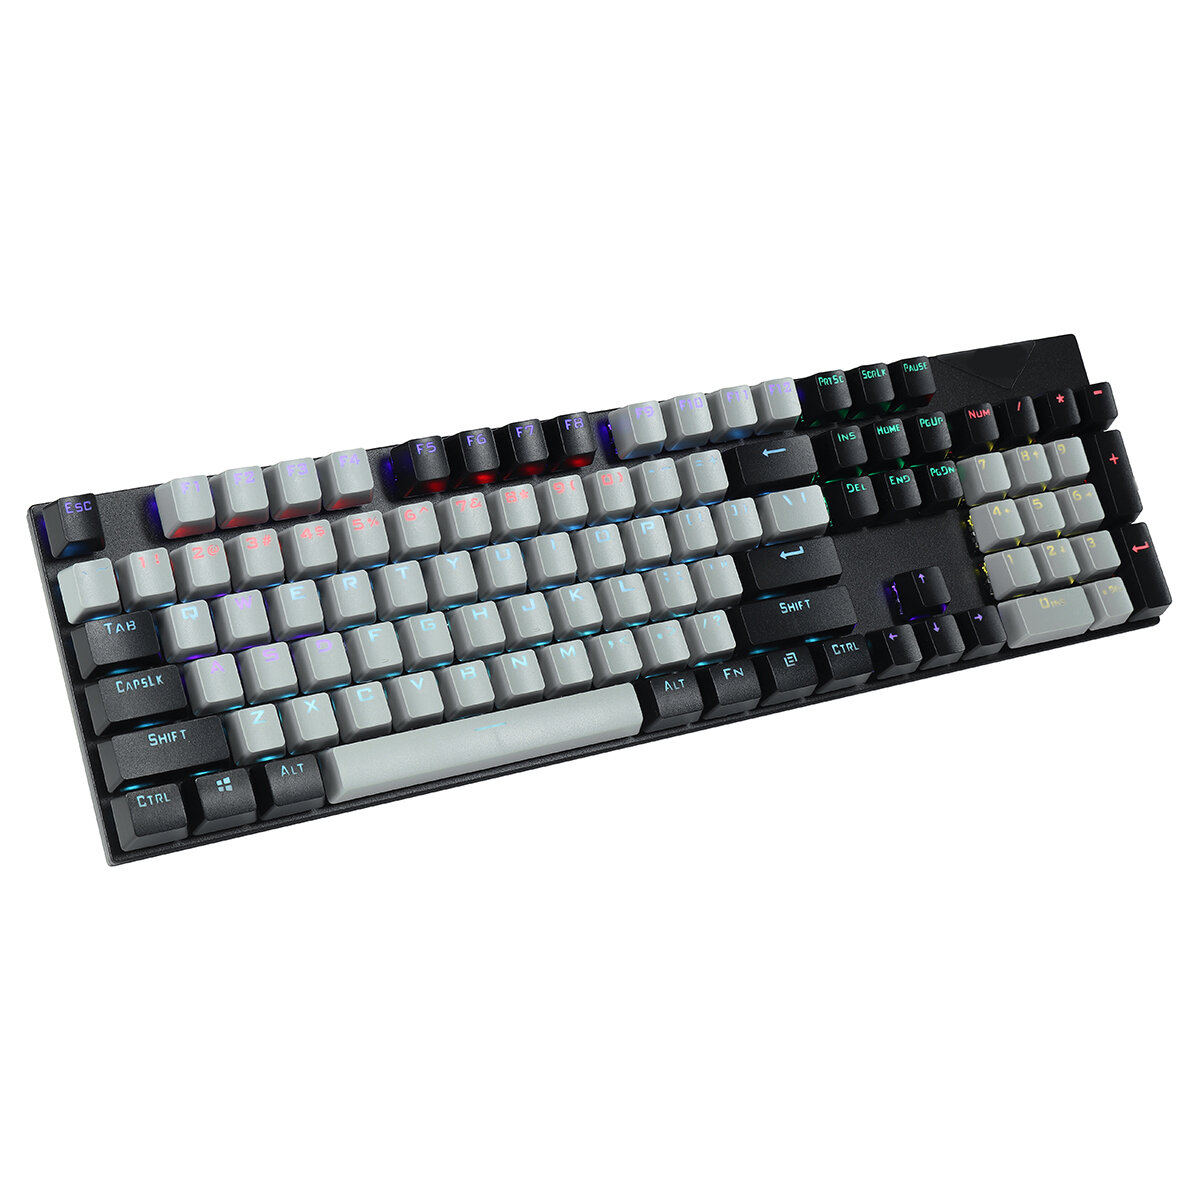 KB168 Wired Mechanical Keyboard 104-Key Conflict-Free Keys Suspend ABS Keycaps Blue Switch RGB Backl